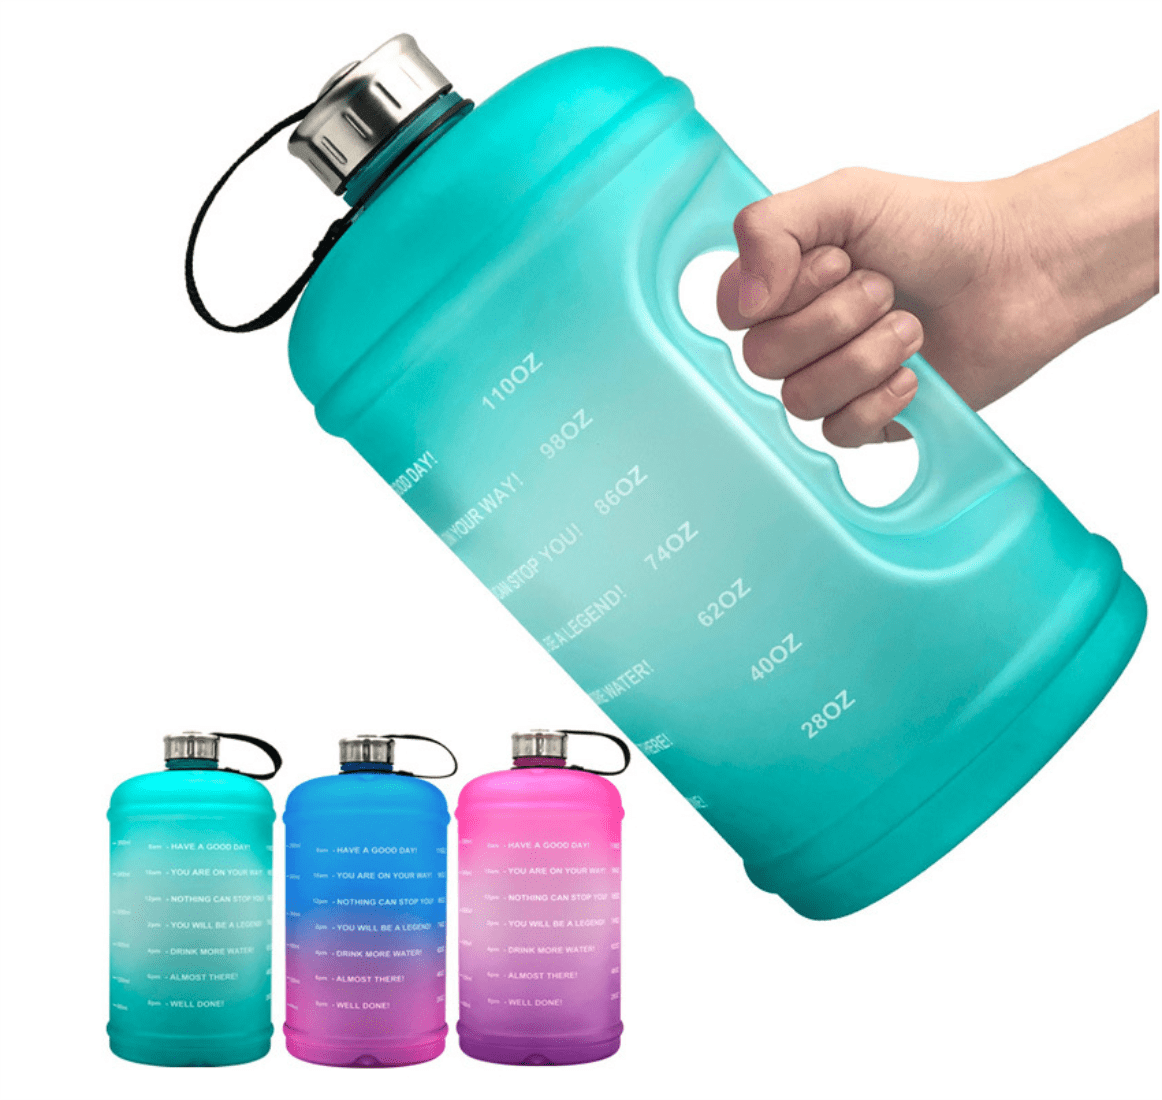 Myth Motivational Gallon Water Bottle with Straw - 1 Gallon Water